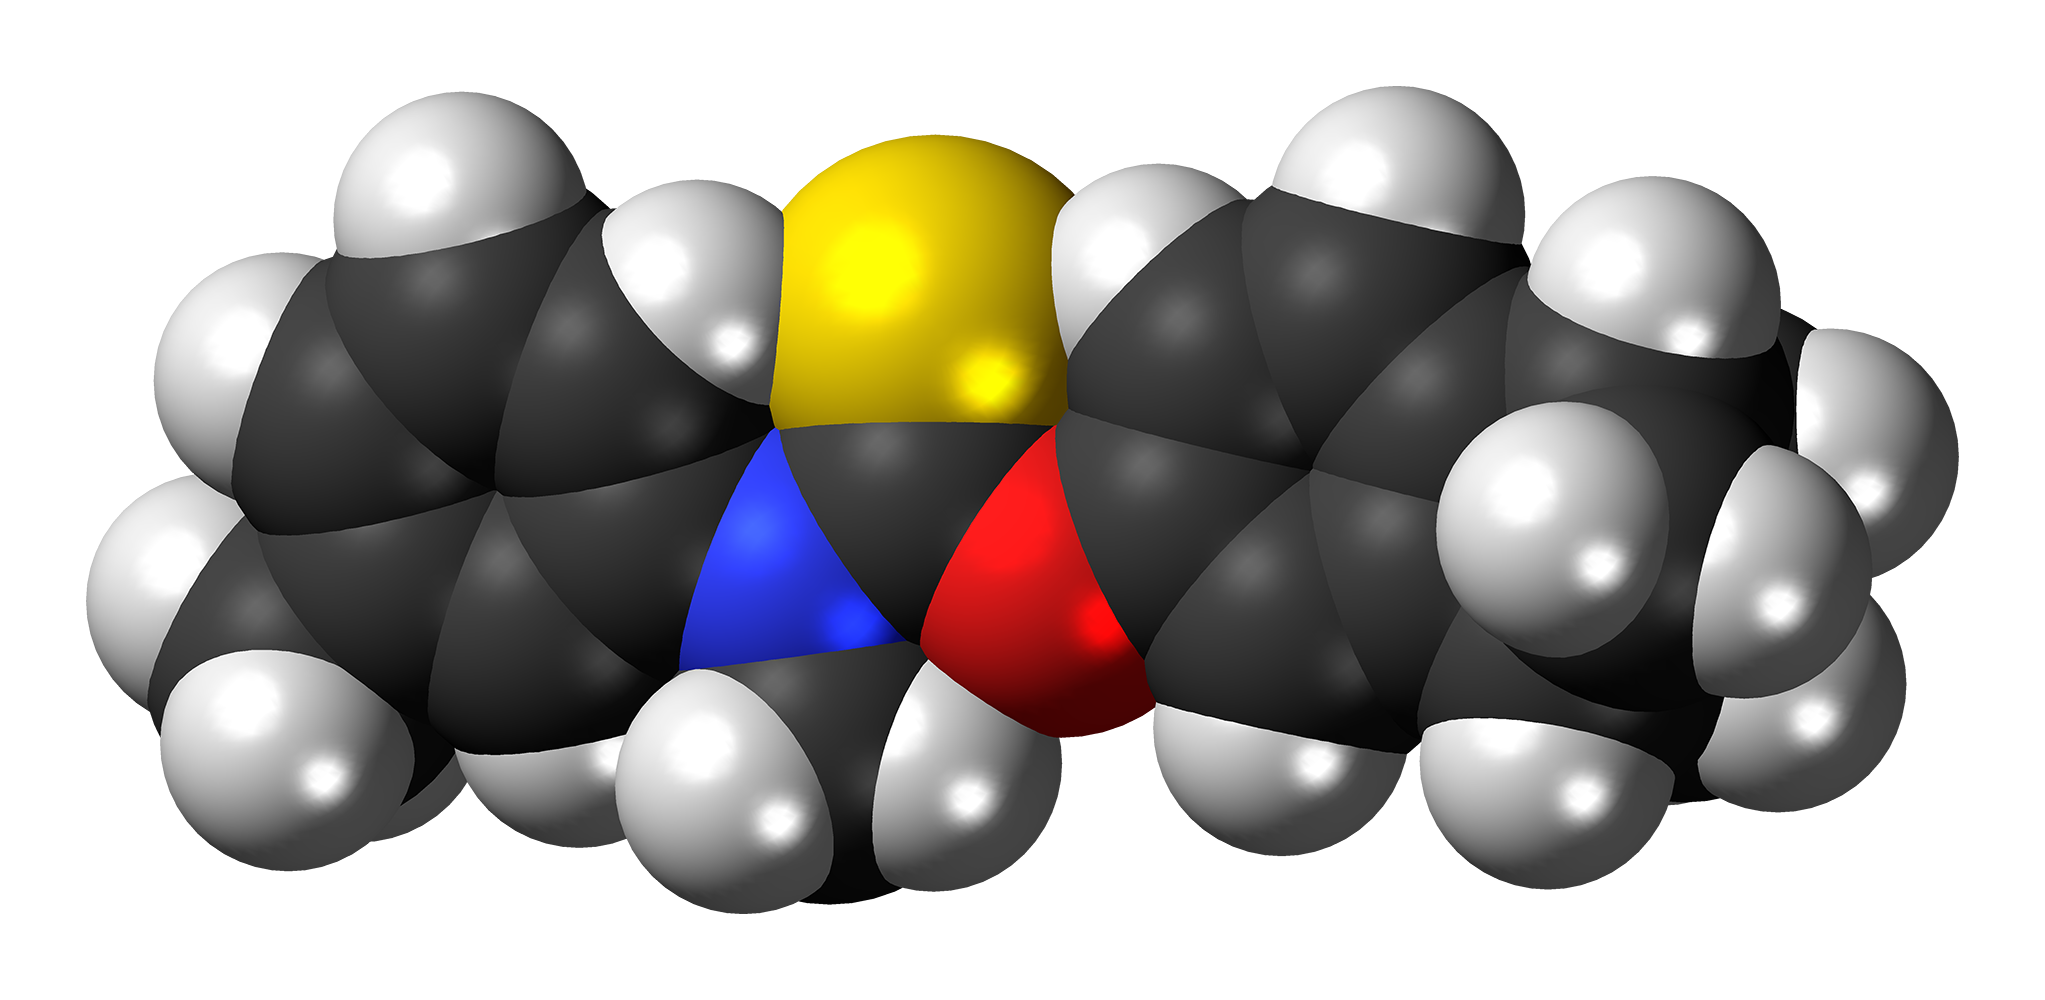 Space-filling model of the tolciclate molecule